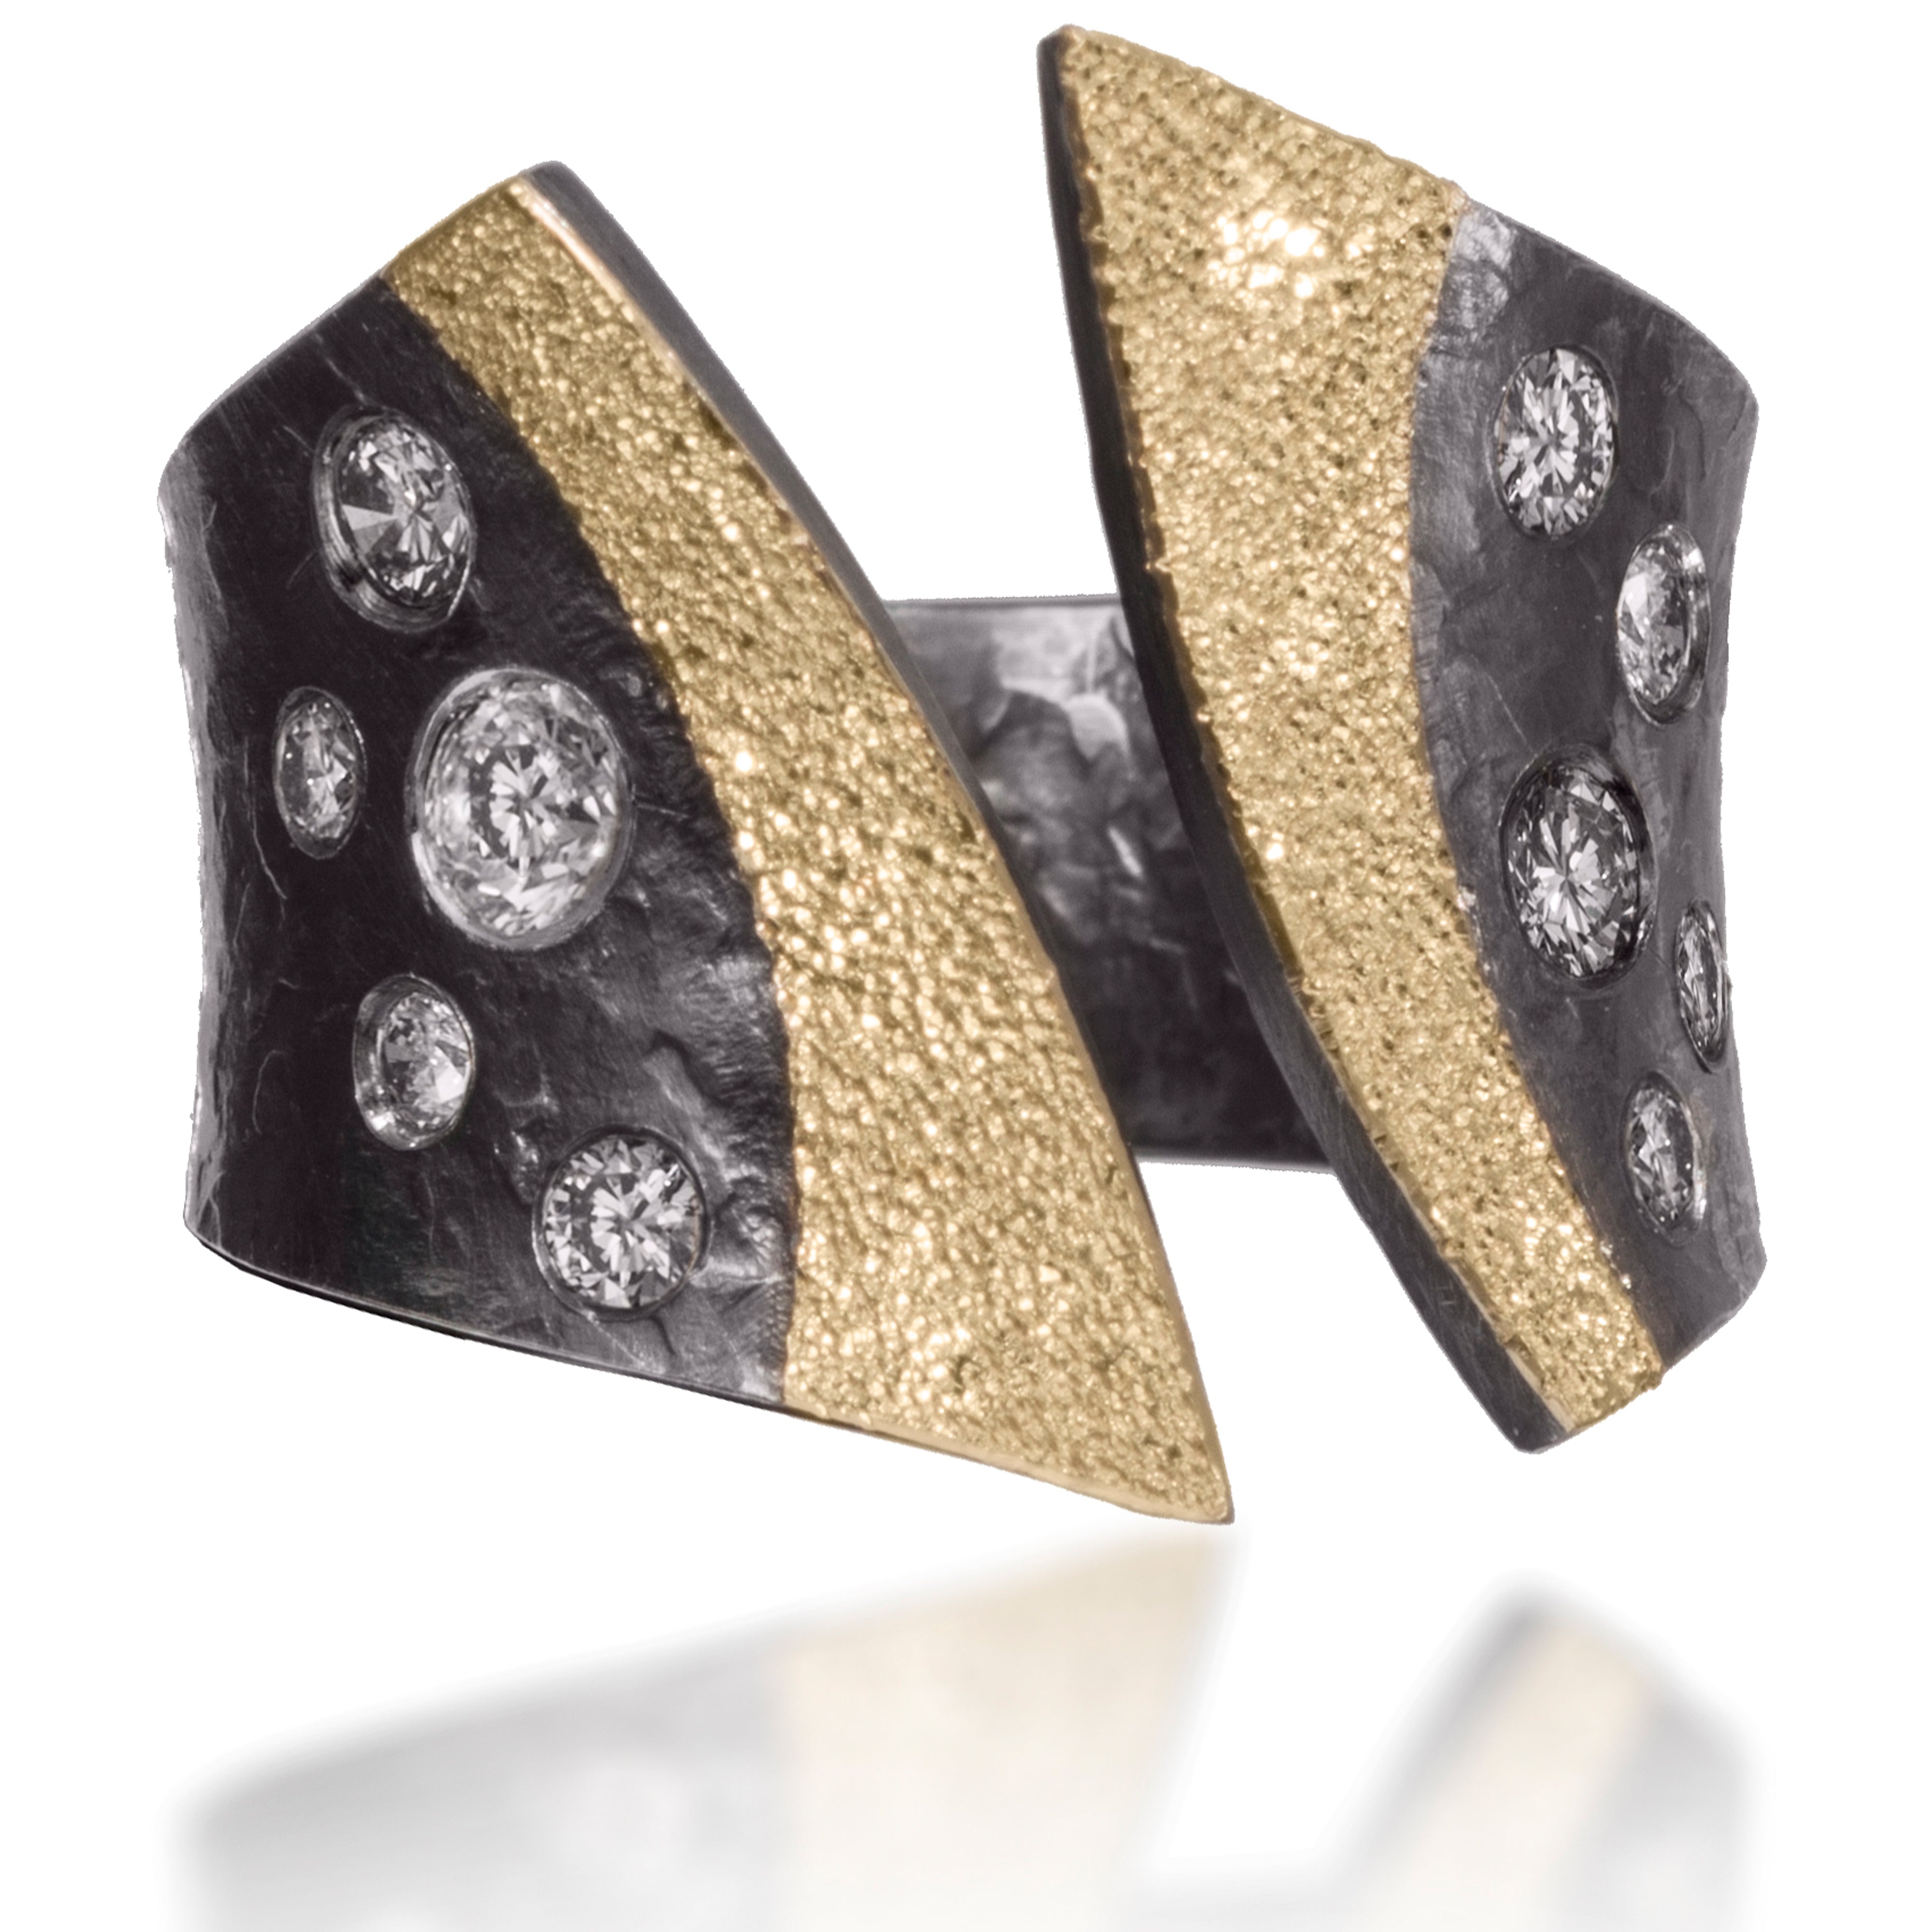 This scintillating variation is nicknamed "tuxedo". Created in 18k gold and oxidized silver, the "tuxedo lapels" are texture with a diamond and framed by flush set assorted diamonds.  It is hand forged and fabricated.  Available in white or gray diamonds.  As shown, 0.25 tcw.